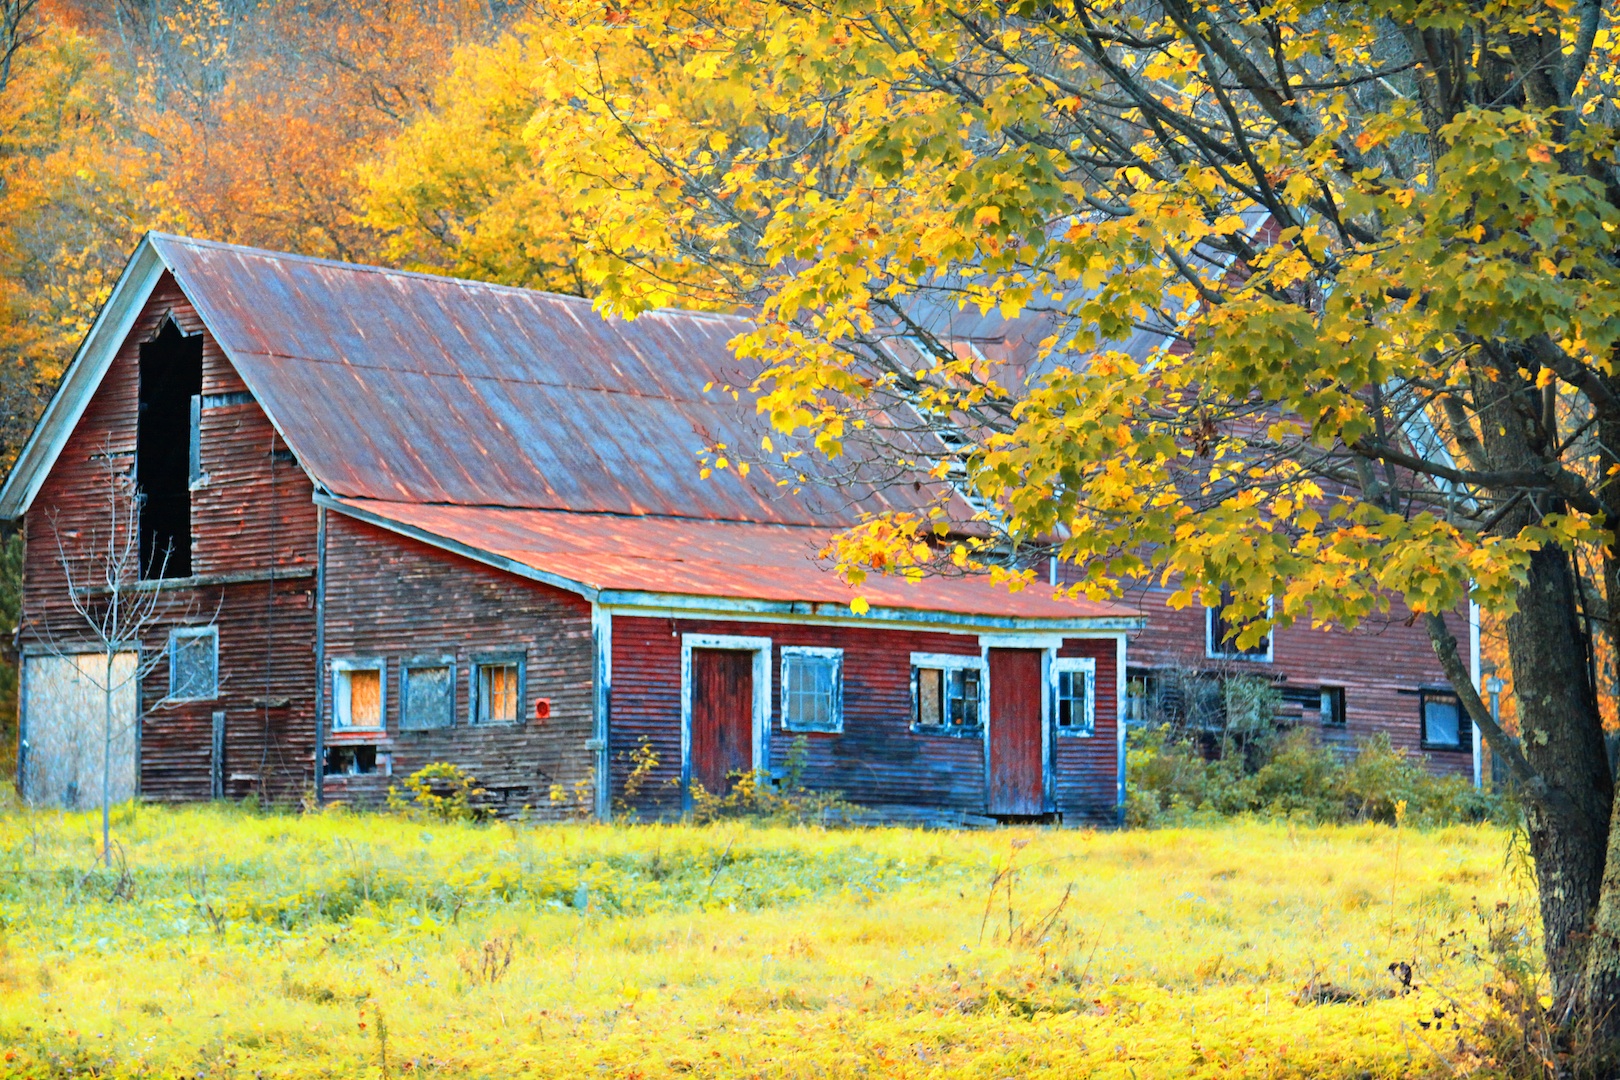 Rustic Red Barn In S. Duxbury, Vt (user submitted)